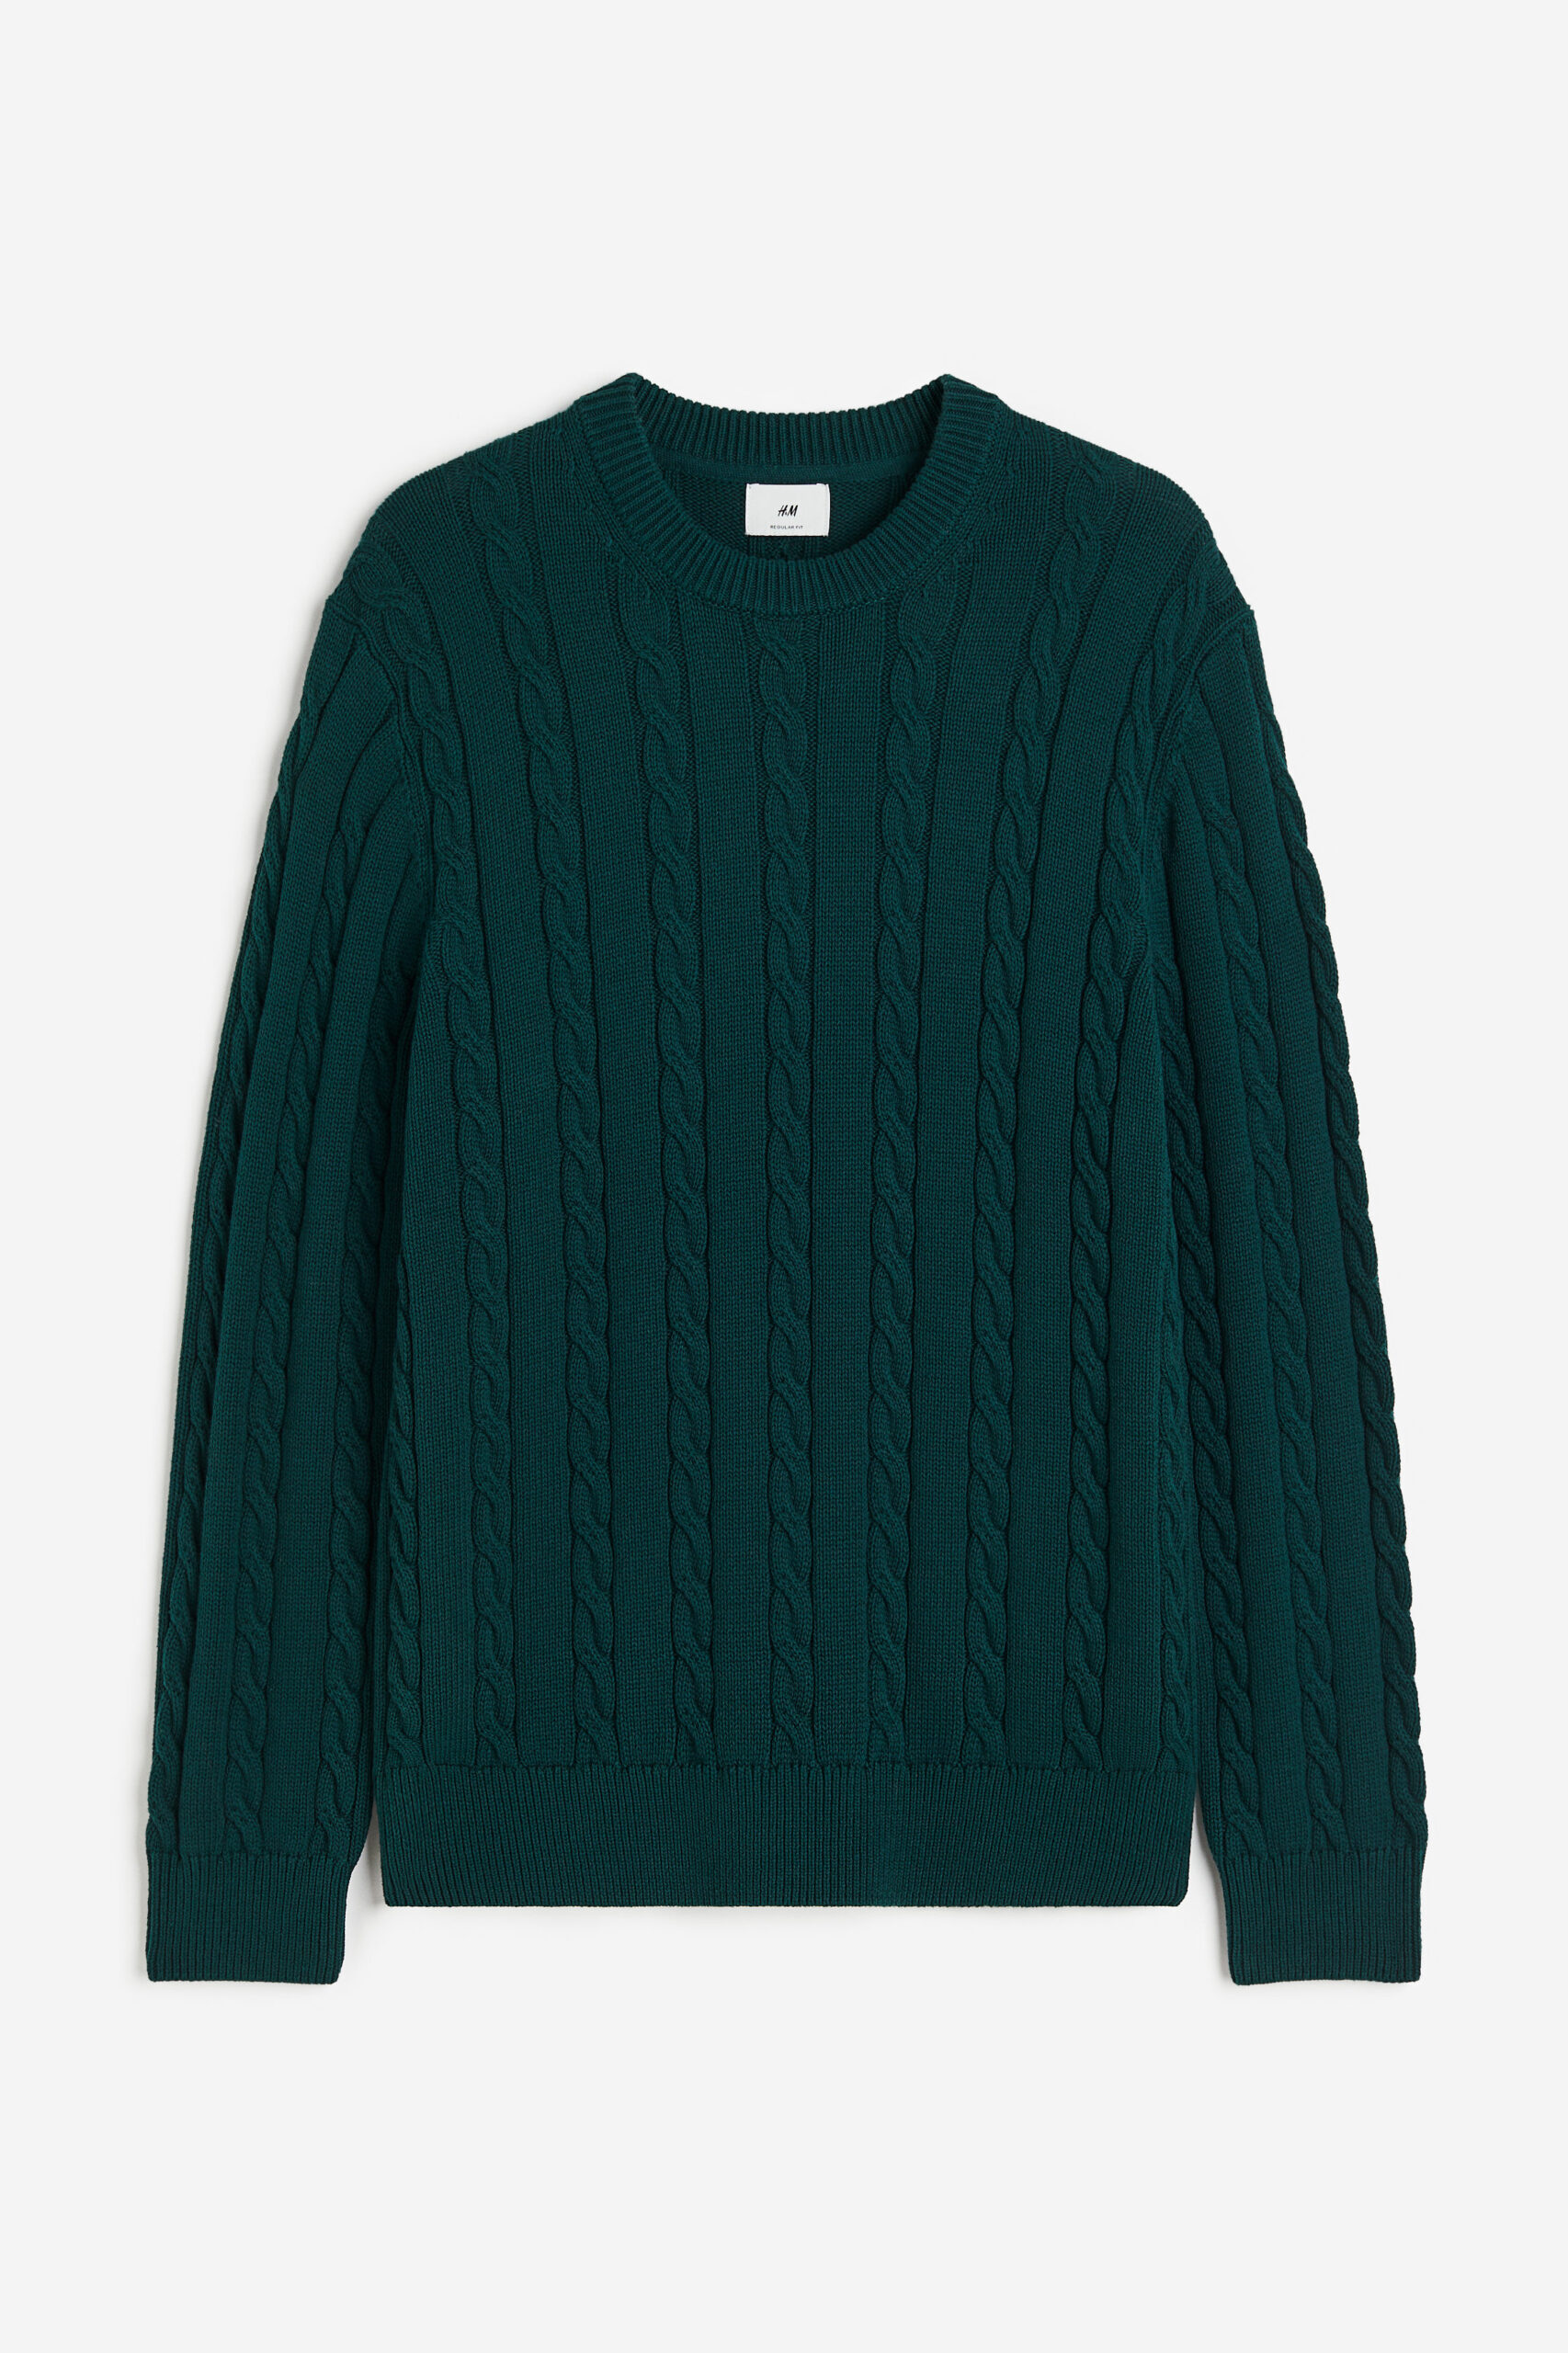 Men's forest green knit sweater.